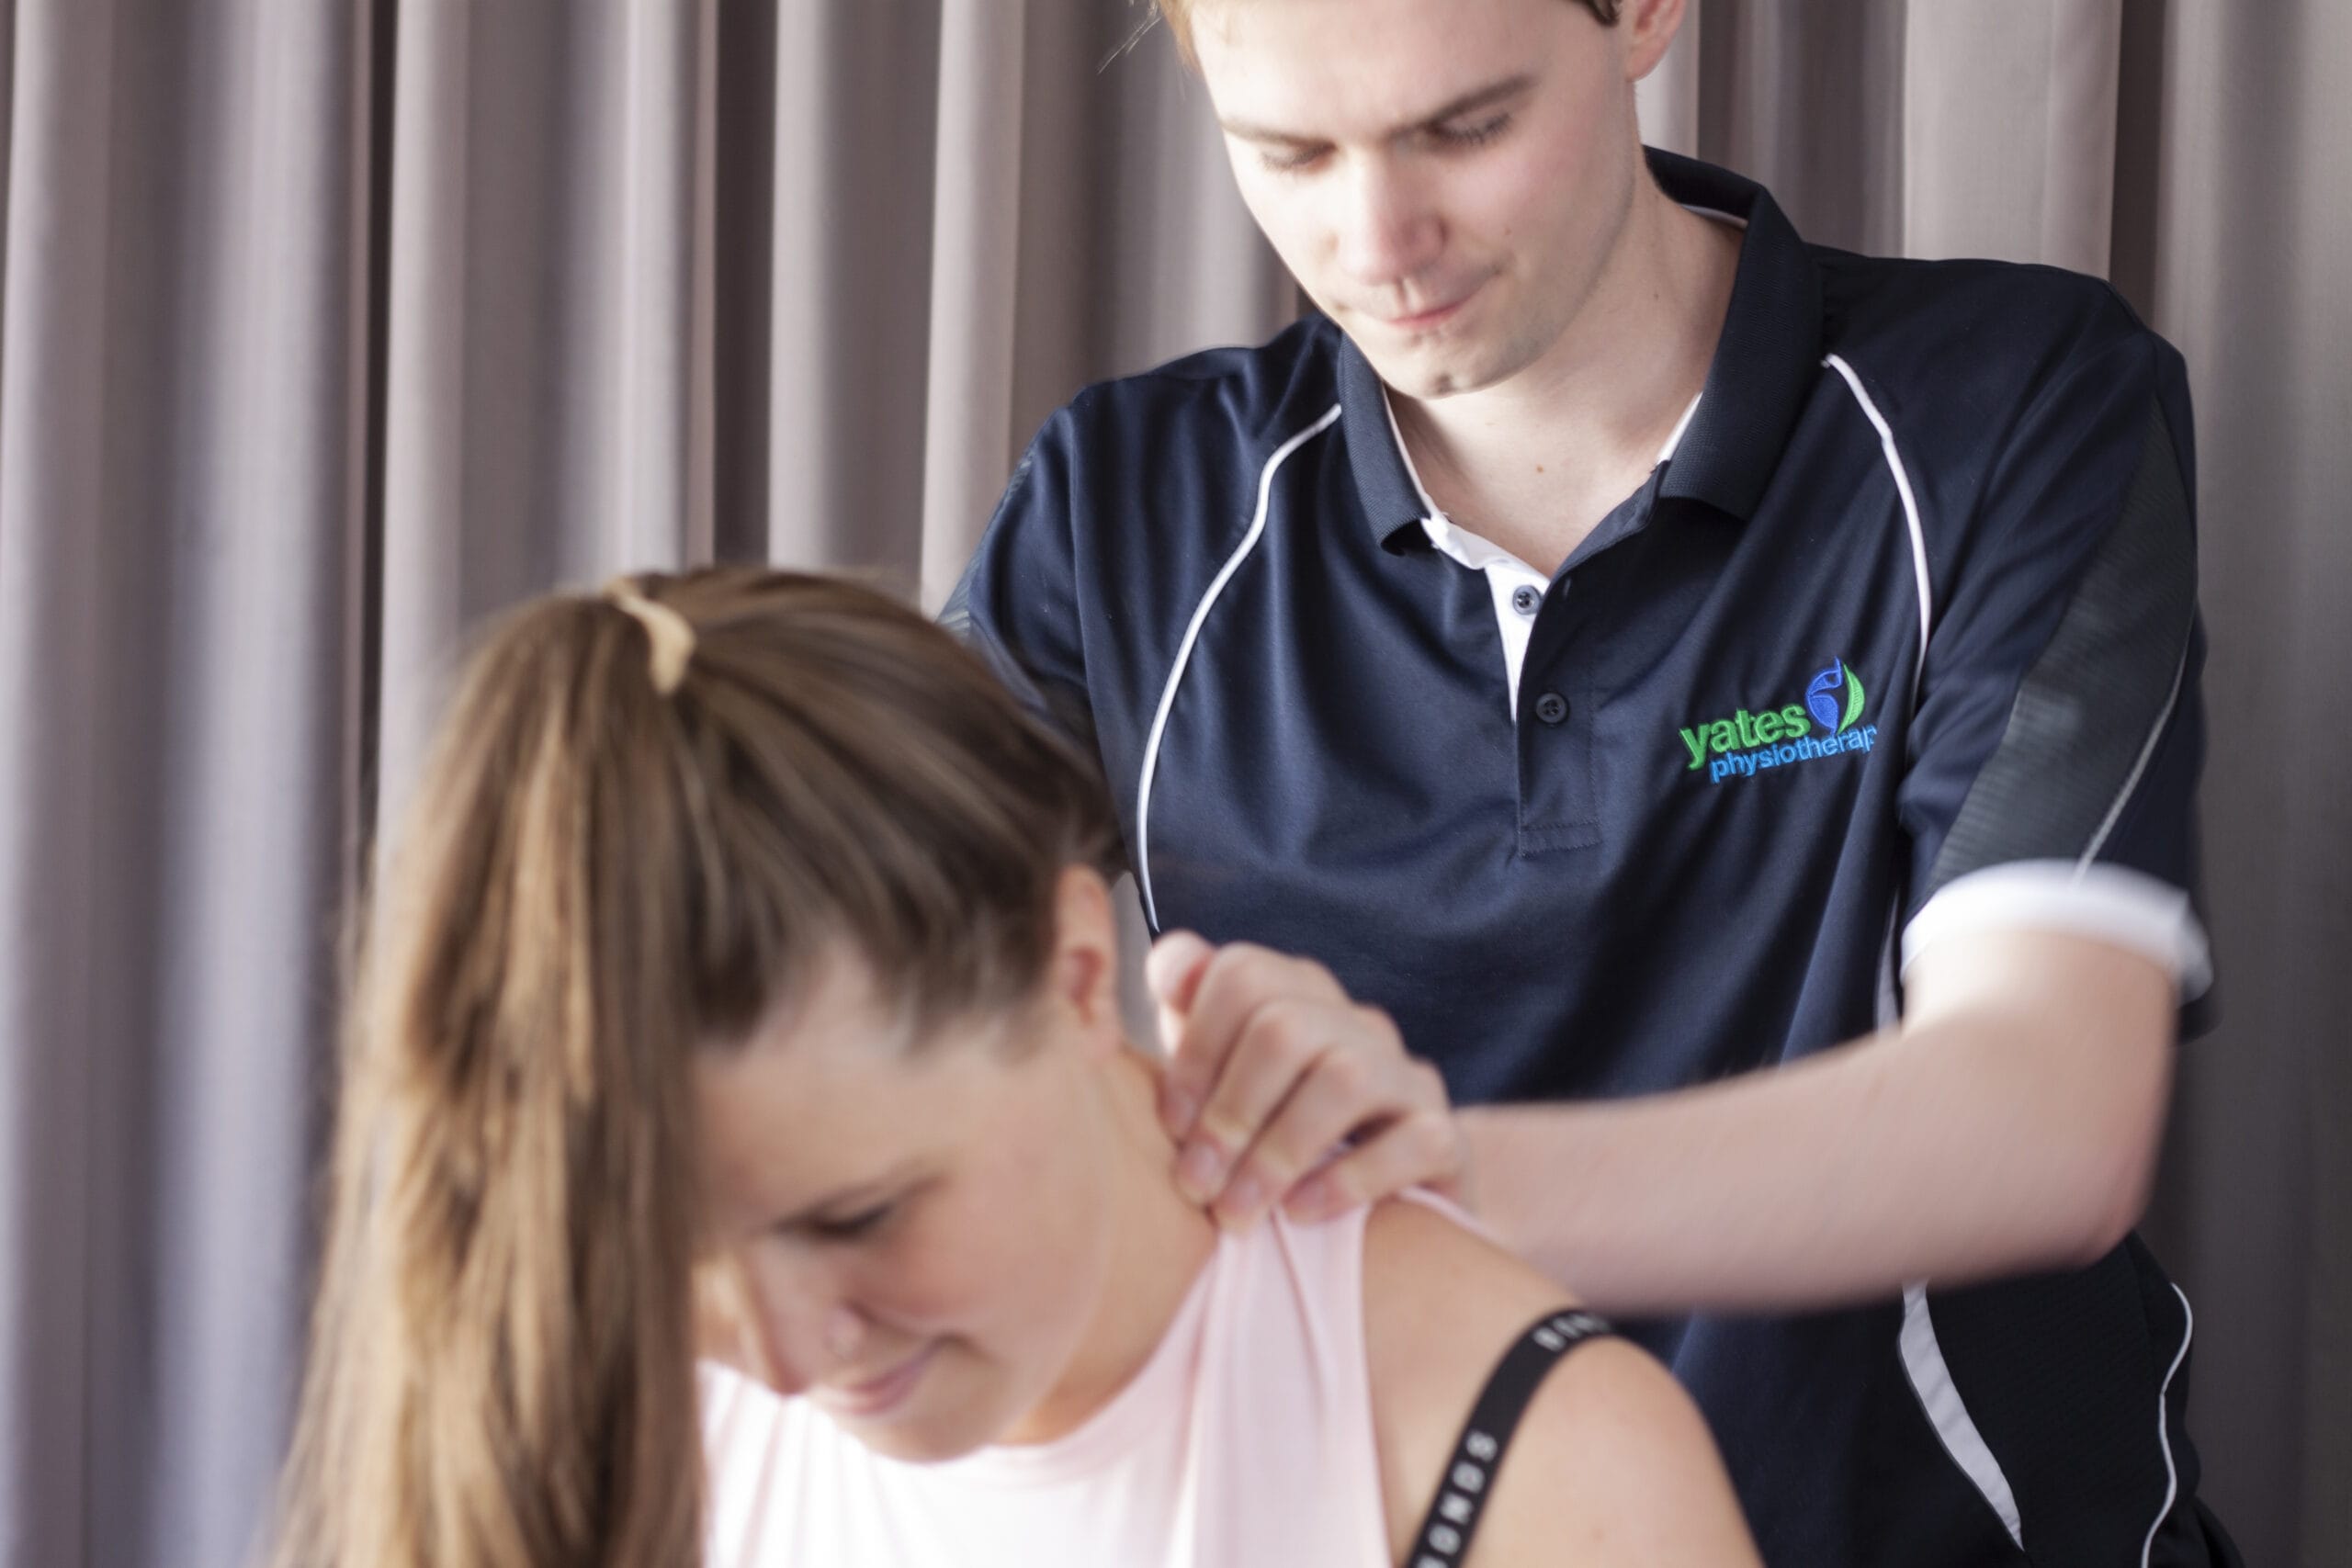 A person receiving a soothing massage therapy session from a skilled therapist at Yates Physiotherapy, Adelaide